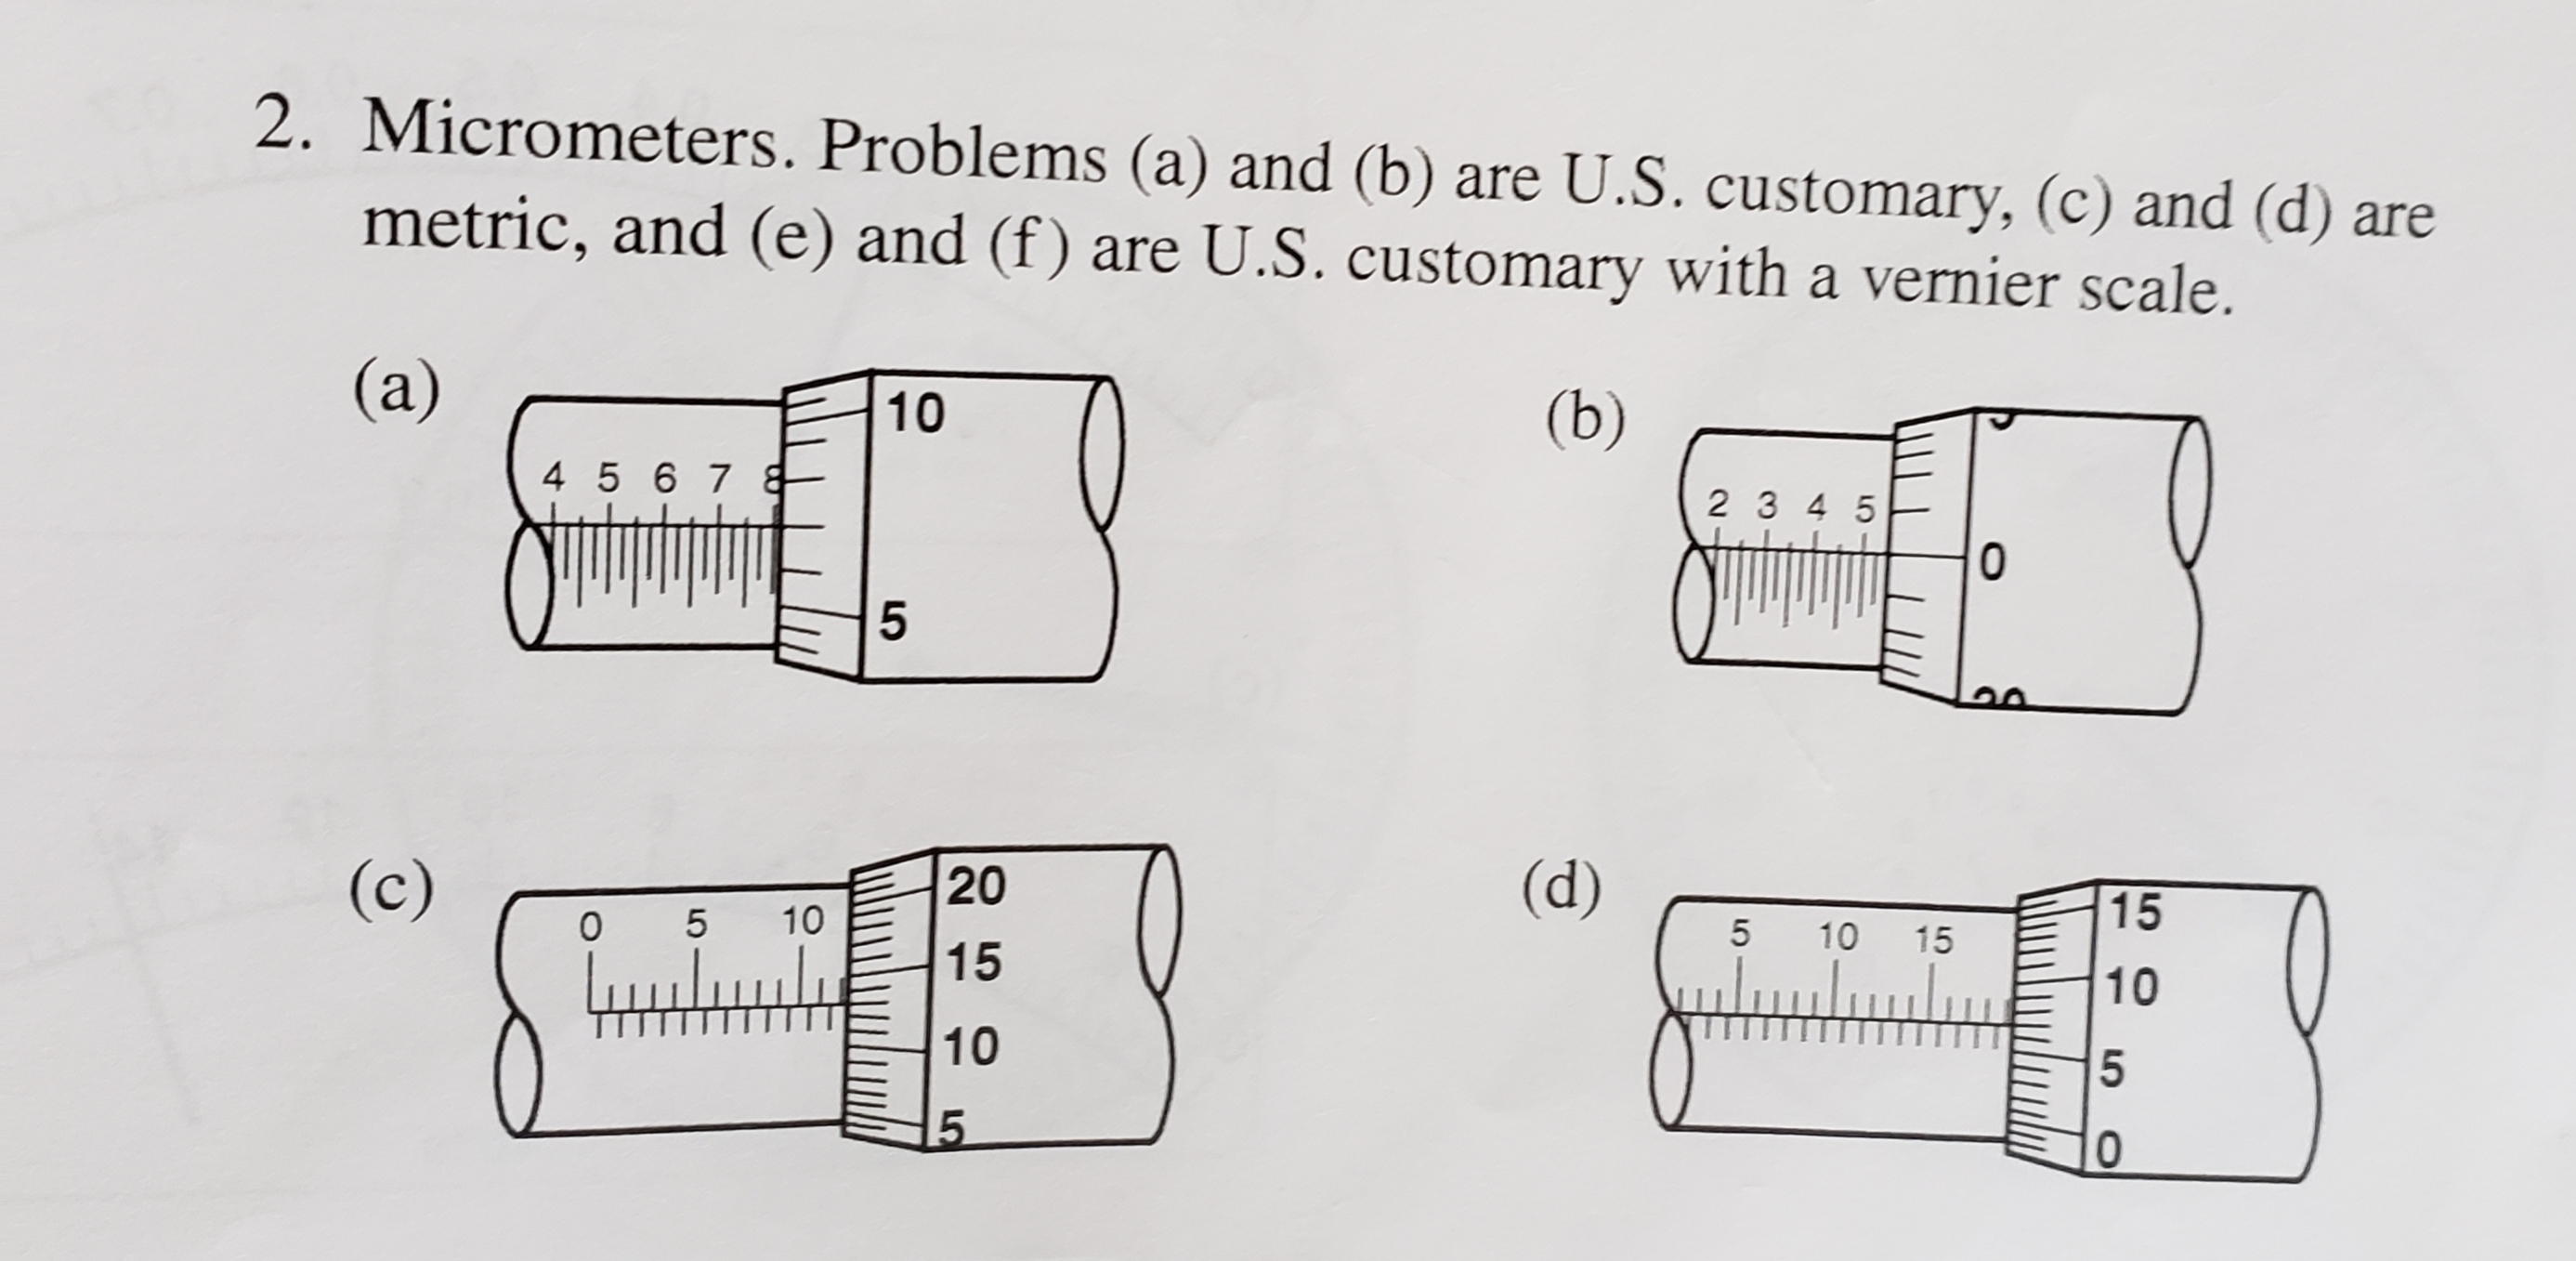 2. Micrometers. Problems (a) and (b) are U.S. customary, (c) and (d) are
metric, and (e) and (f) are U.S. customary with a vernier scale.
(a)
10
(b)
4 5 67
2 3 4 5
(c)
20
(d)
15
10
5 10
15
15
10
10
5O
